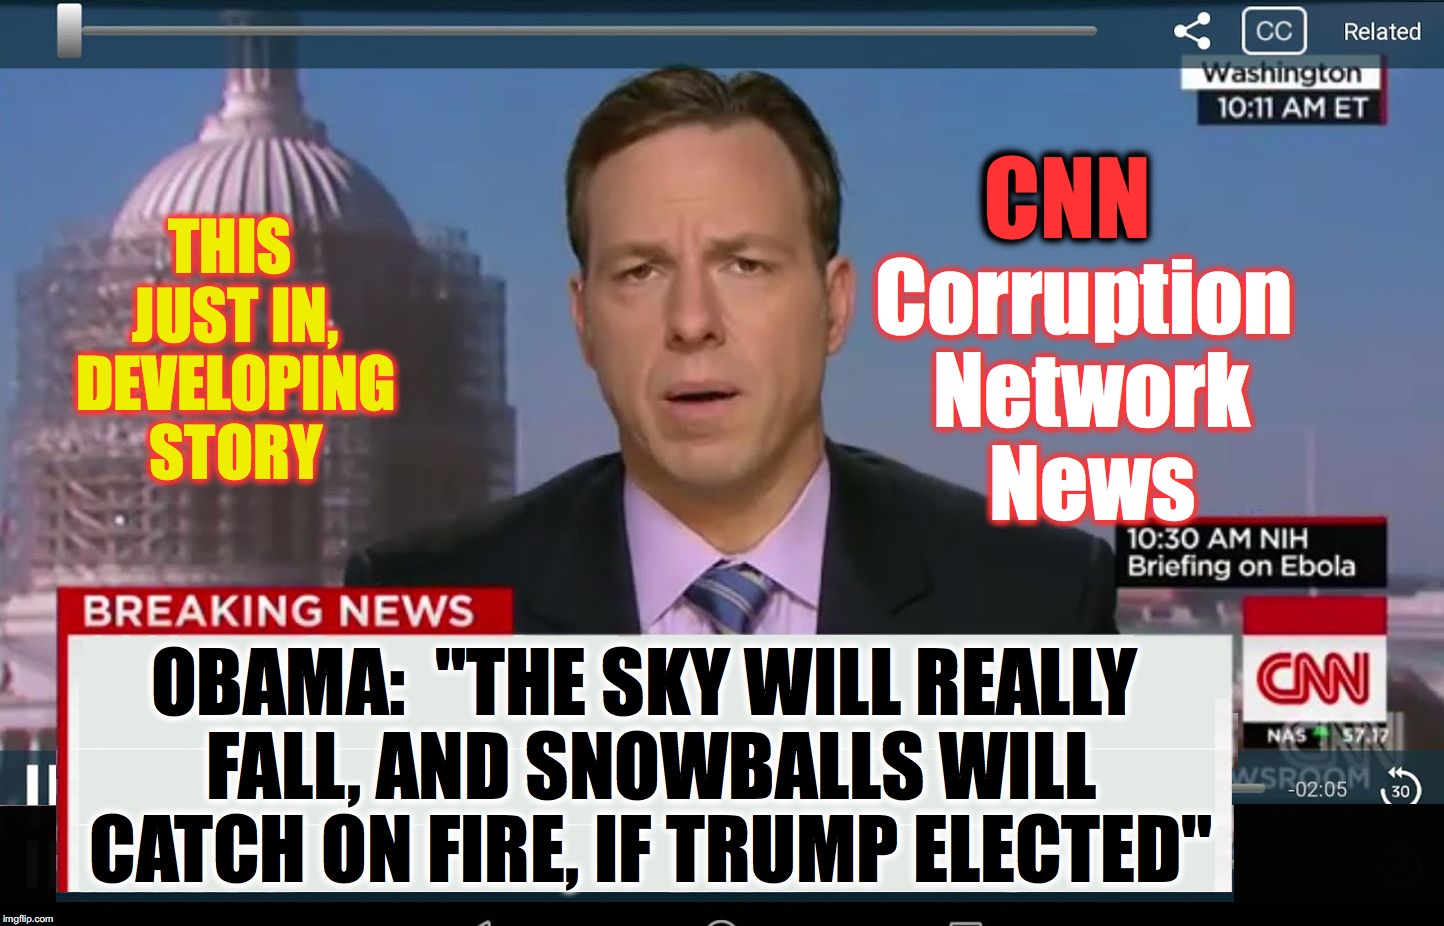 CNN Crazy News Network | CNN; Corruption Network News; THIS JUST IN, DEVELOPING STORY; OBAMA:  "THE SKY WILL REALLY FALL, AND SNOWBALLS WILL CATCH ON FIRE, IF TRUMP ELECTED" | image tagged in cnn crazy news network | made w/ Imgflip meme maker